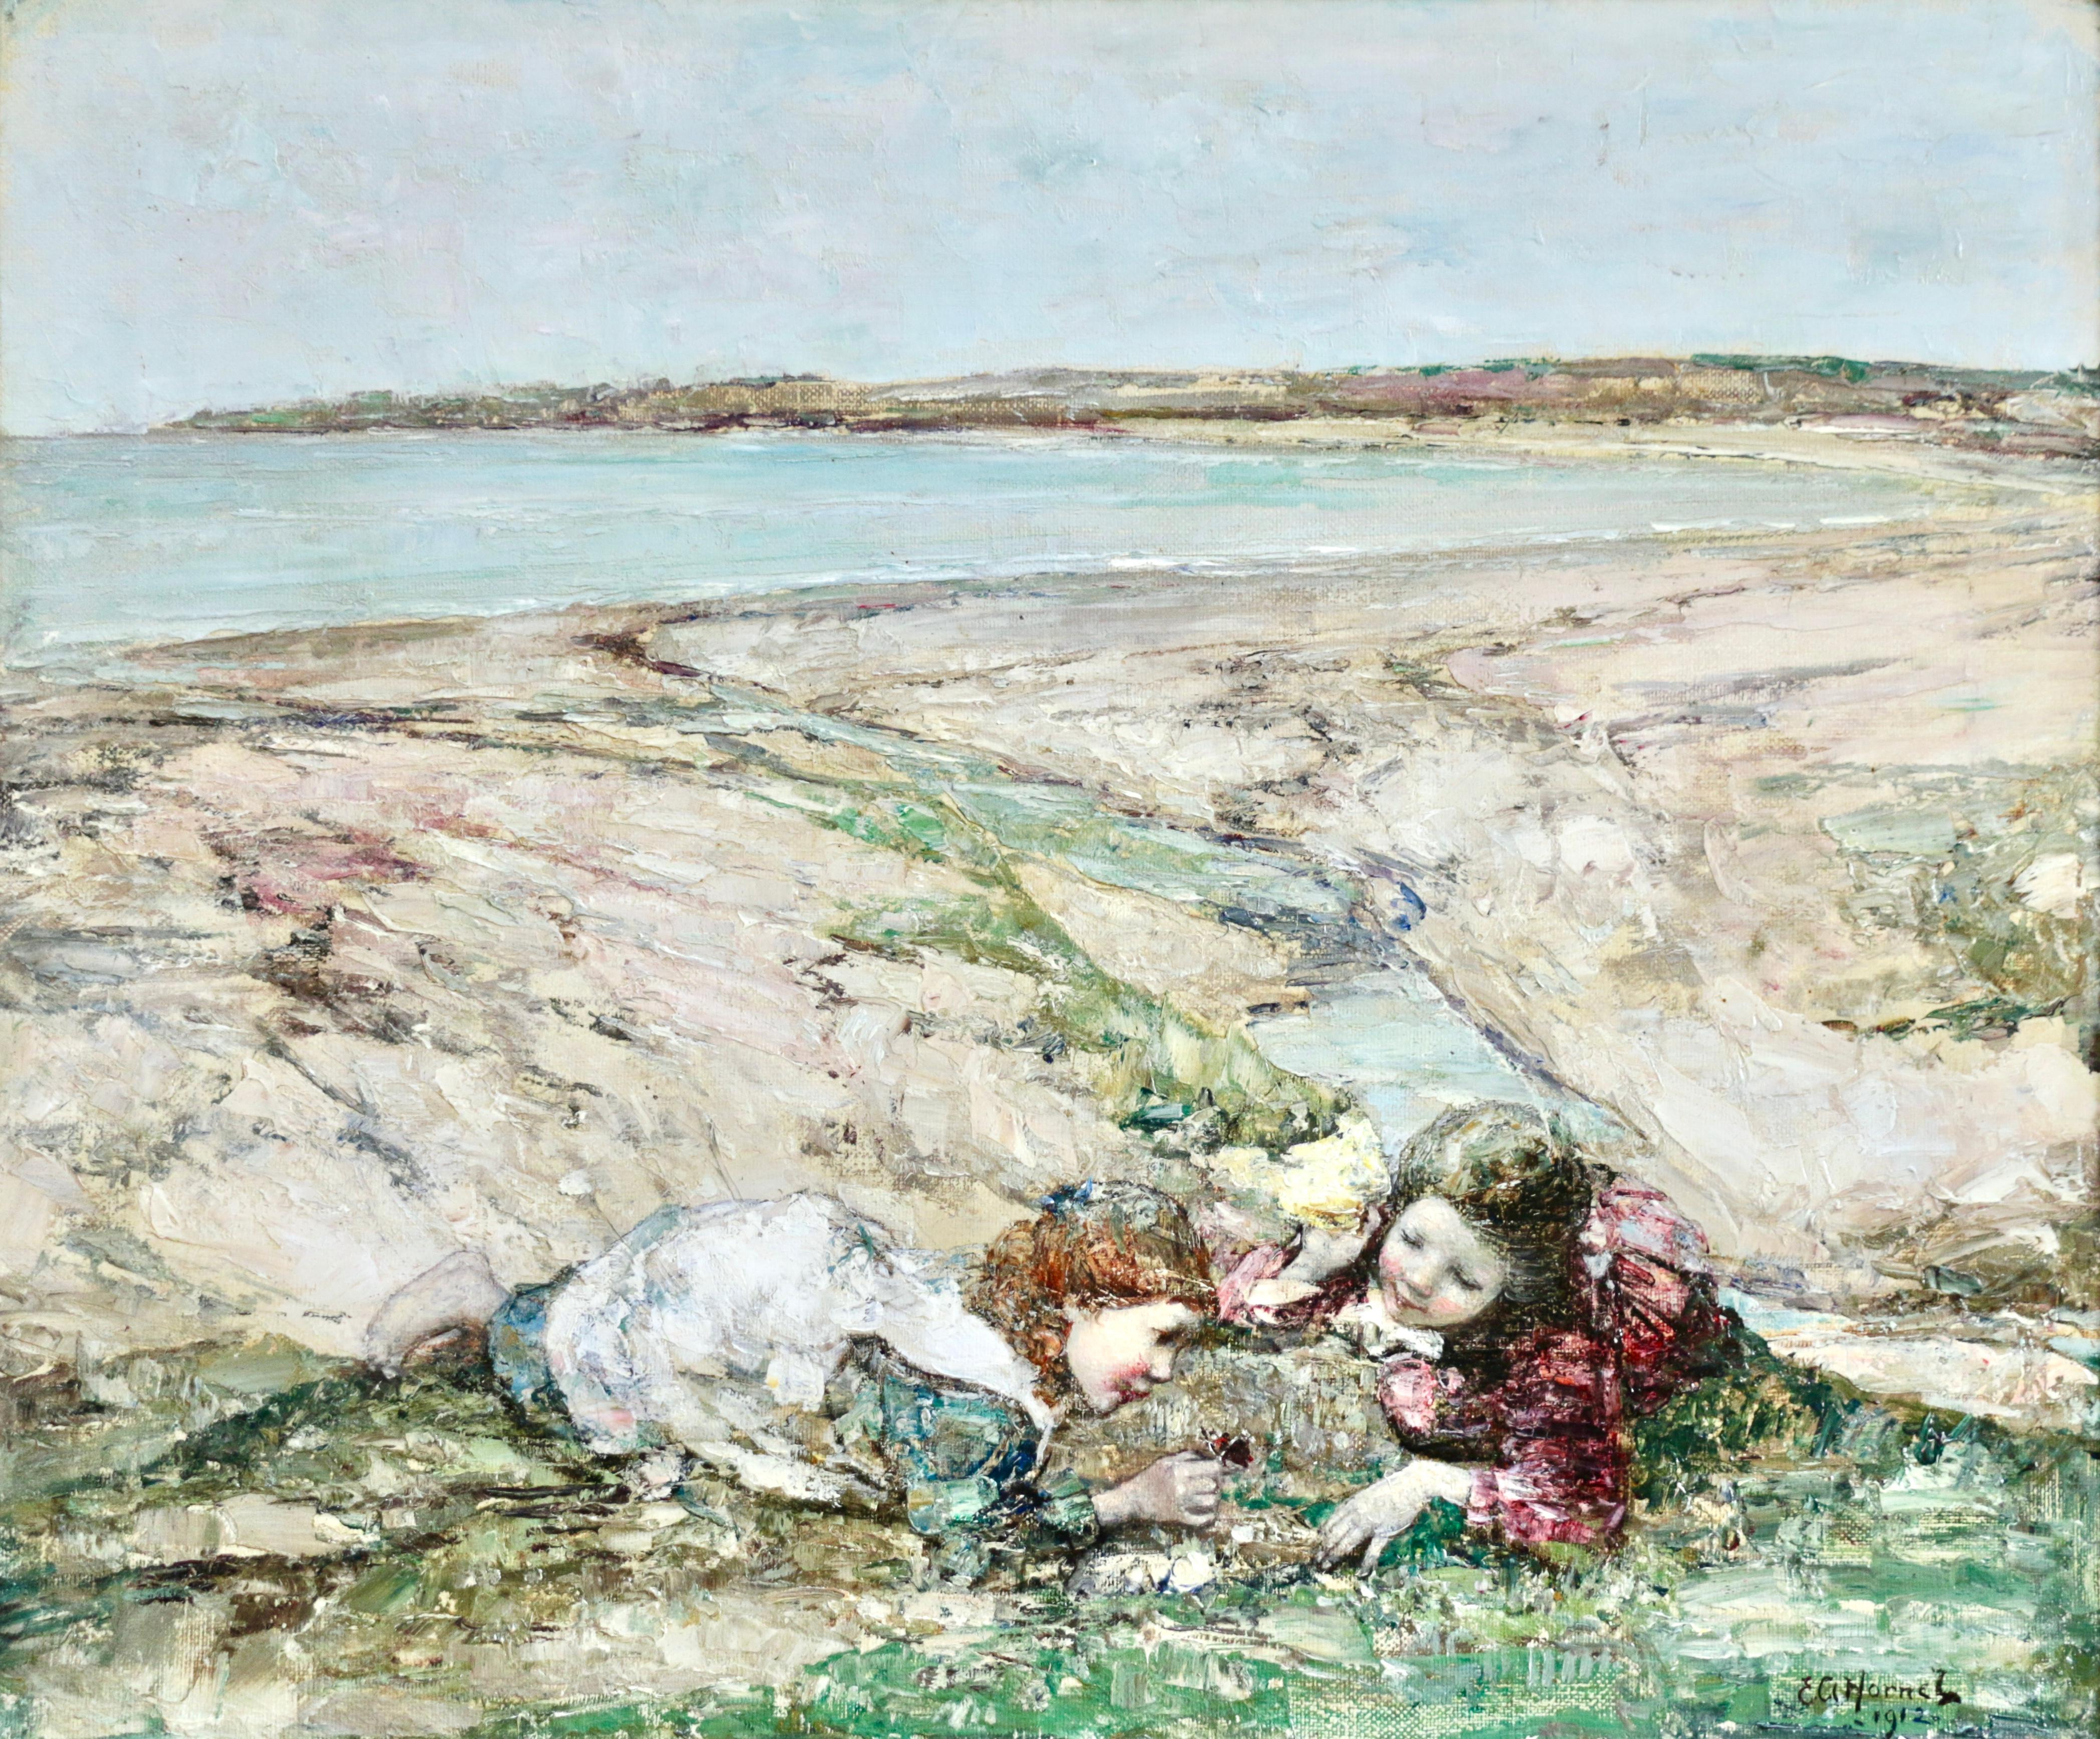 Watching the Butterflies - 19th Century Oil, Girls at Coast Landscape by Hornel - Painting by Edward Atkinson Hornel